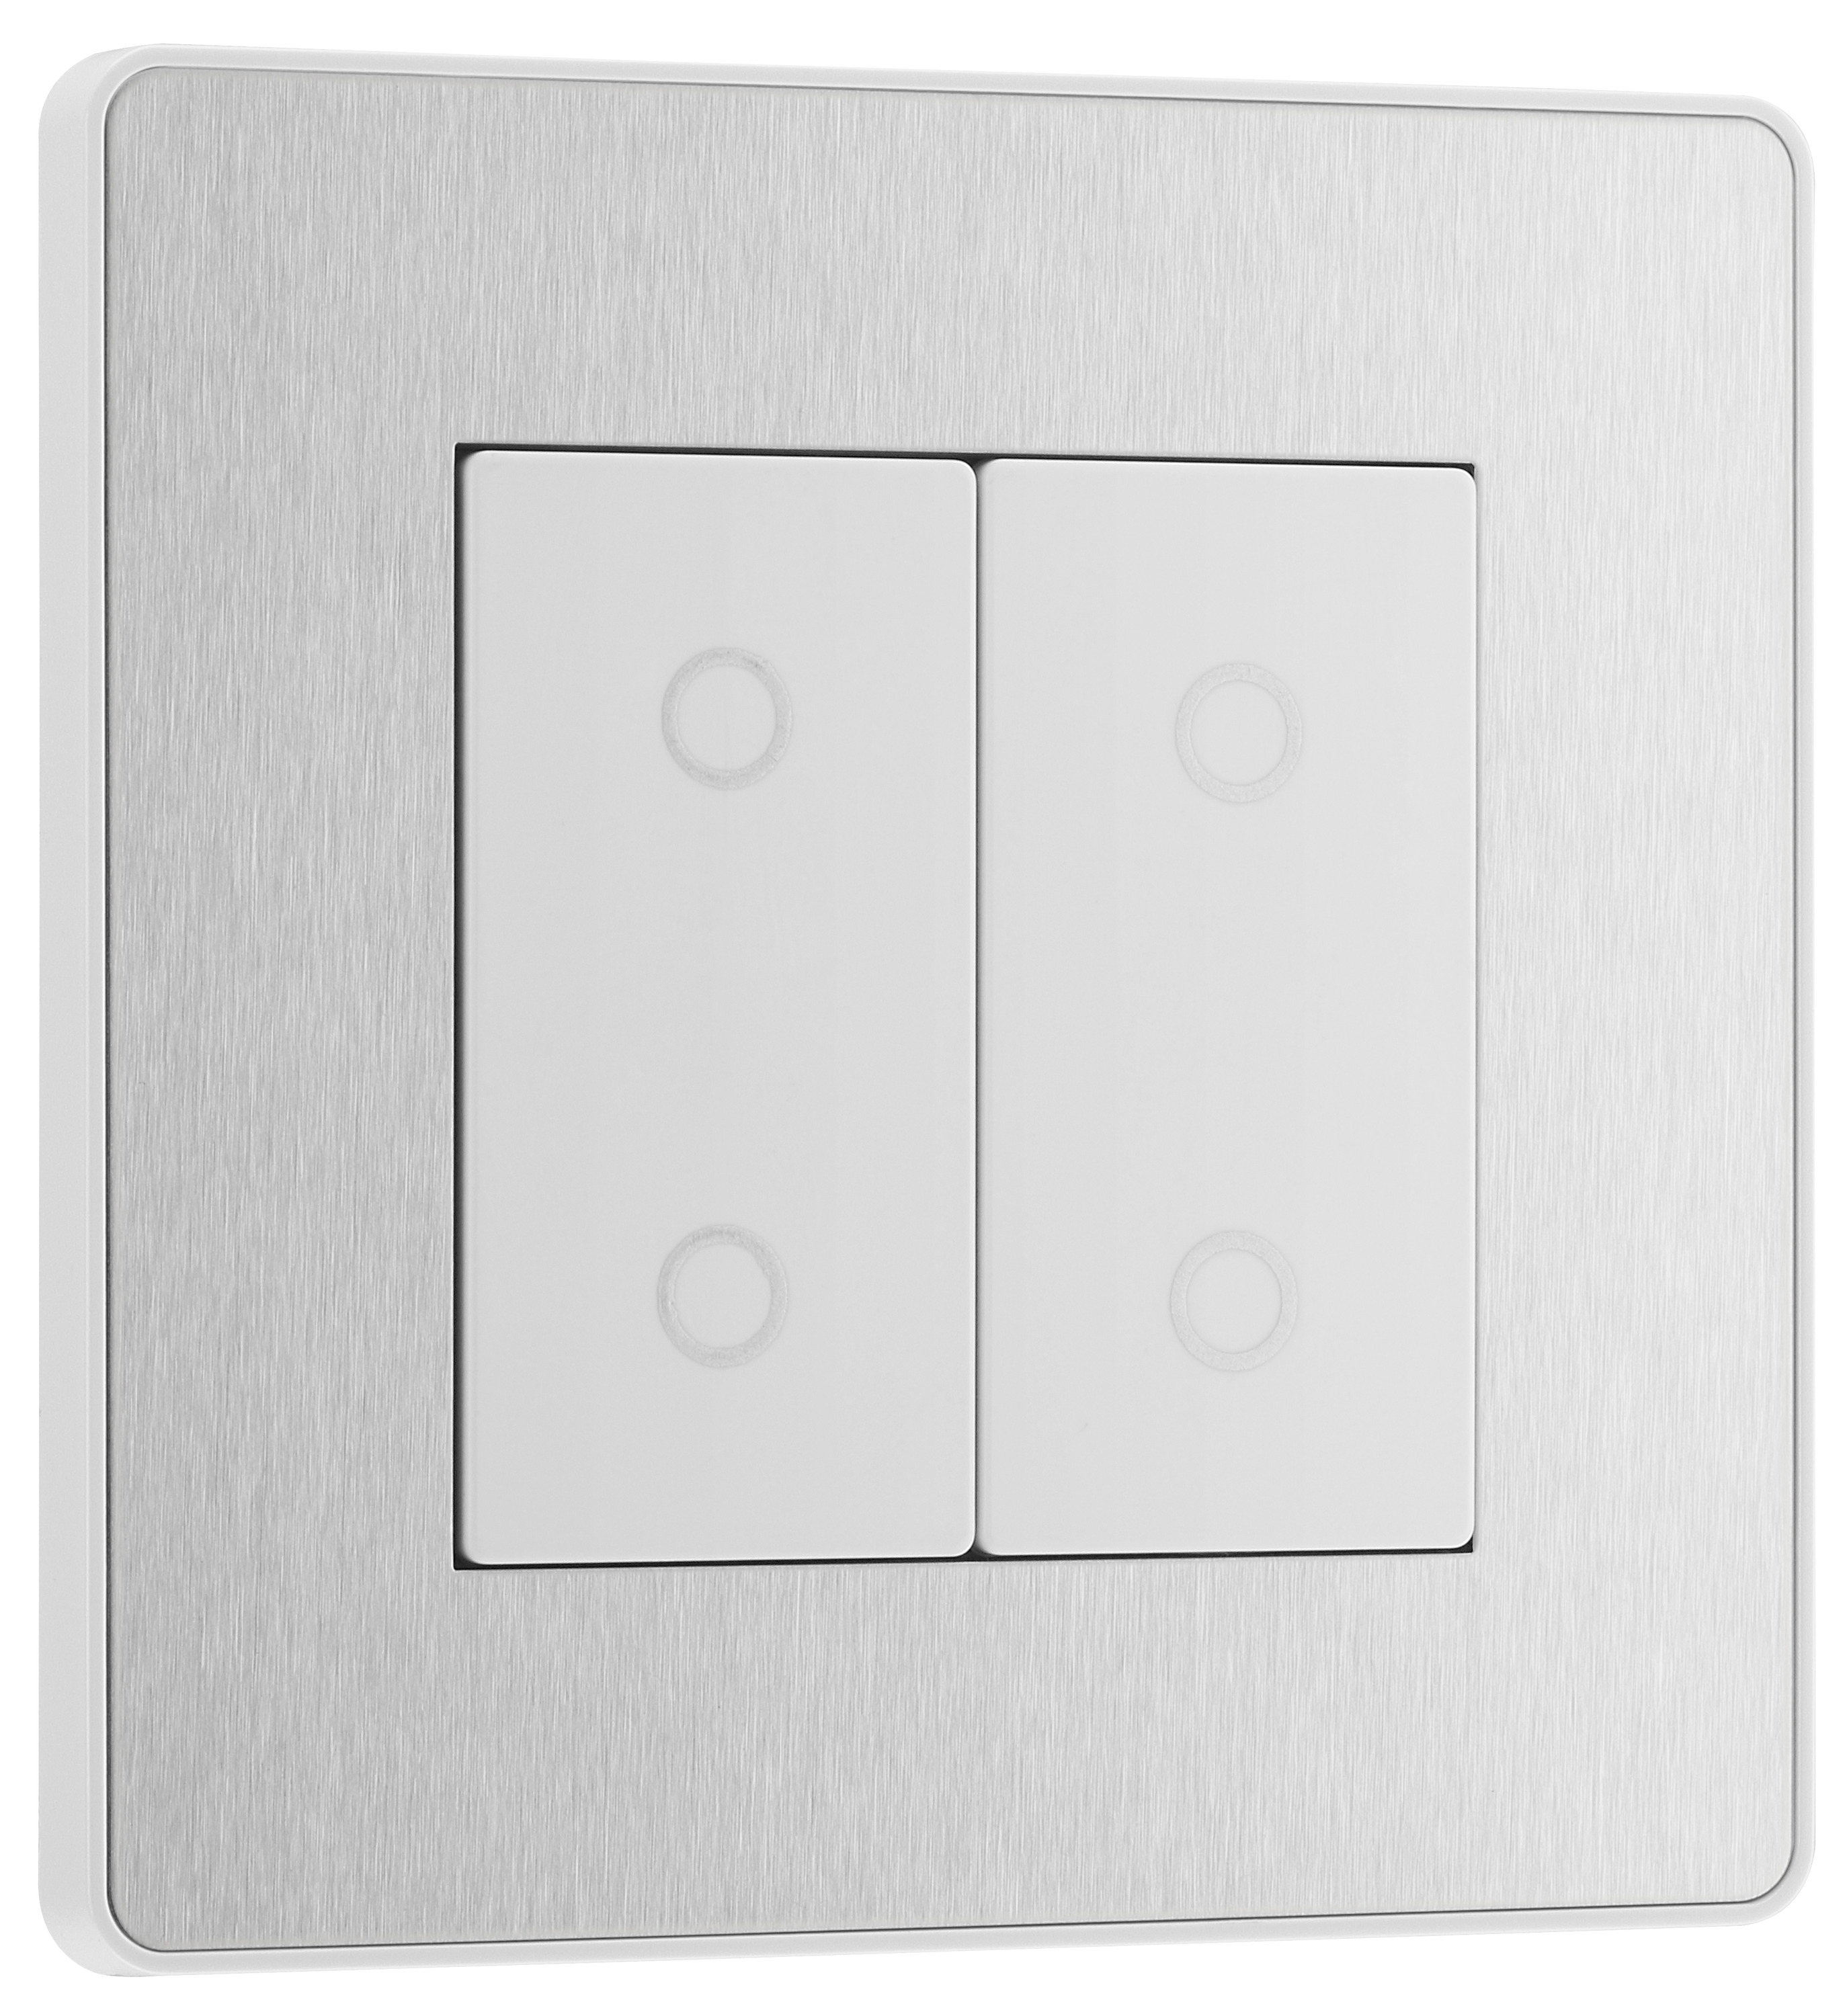 Image of BG Evolve Brushed Steel 2 Way Master Double Touch Dimmer Switch - 200W